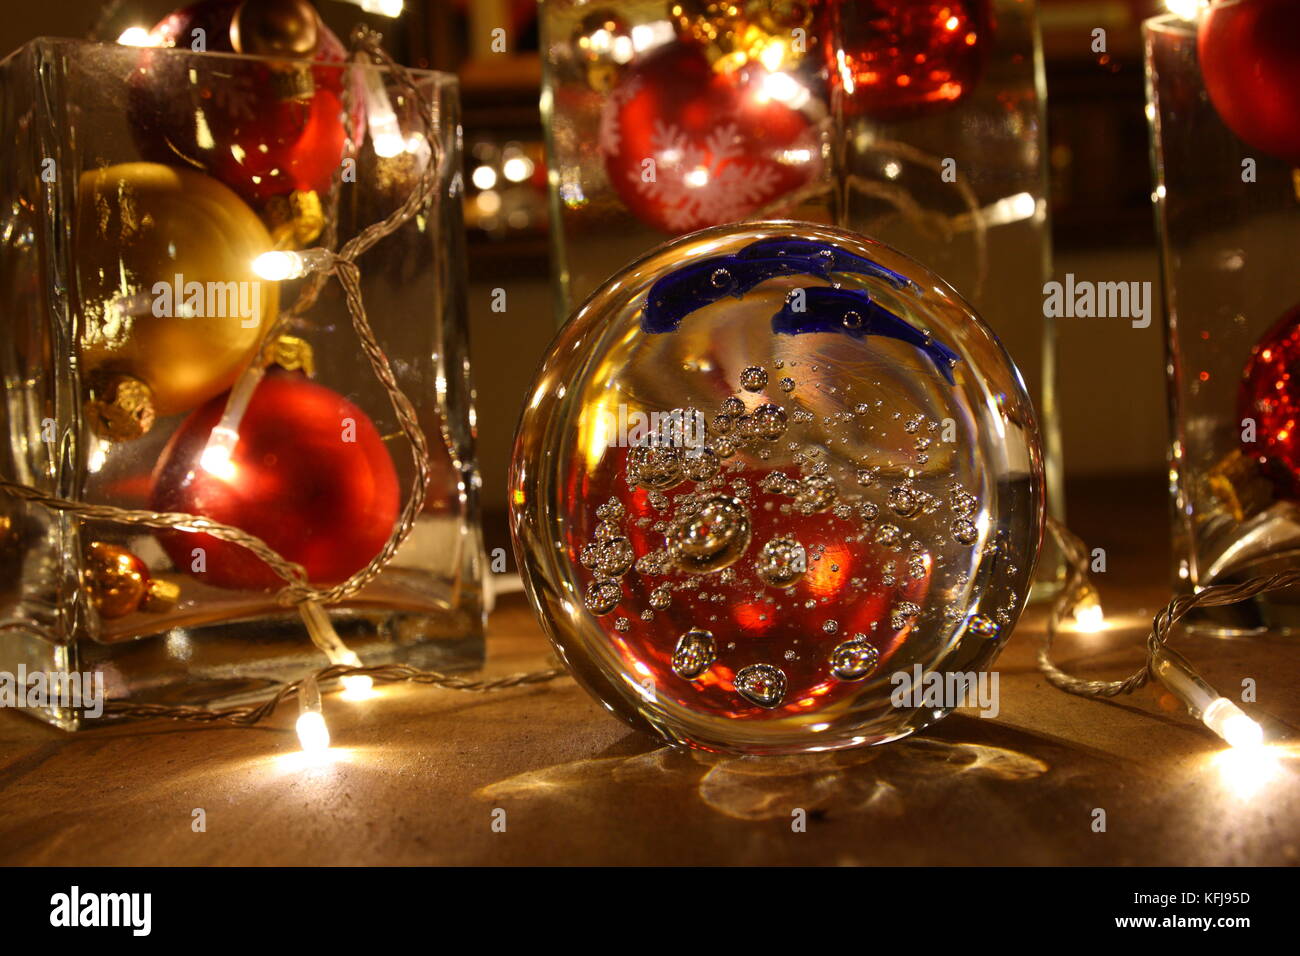 Lichterkette High Resolution Stock Photography and Images - Alamy